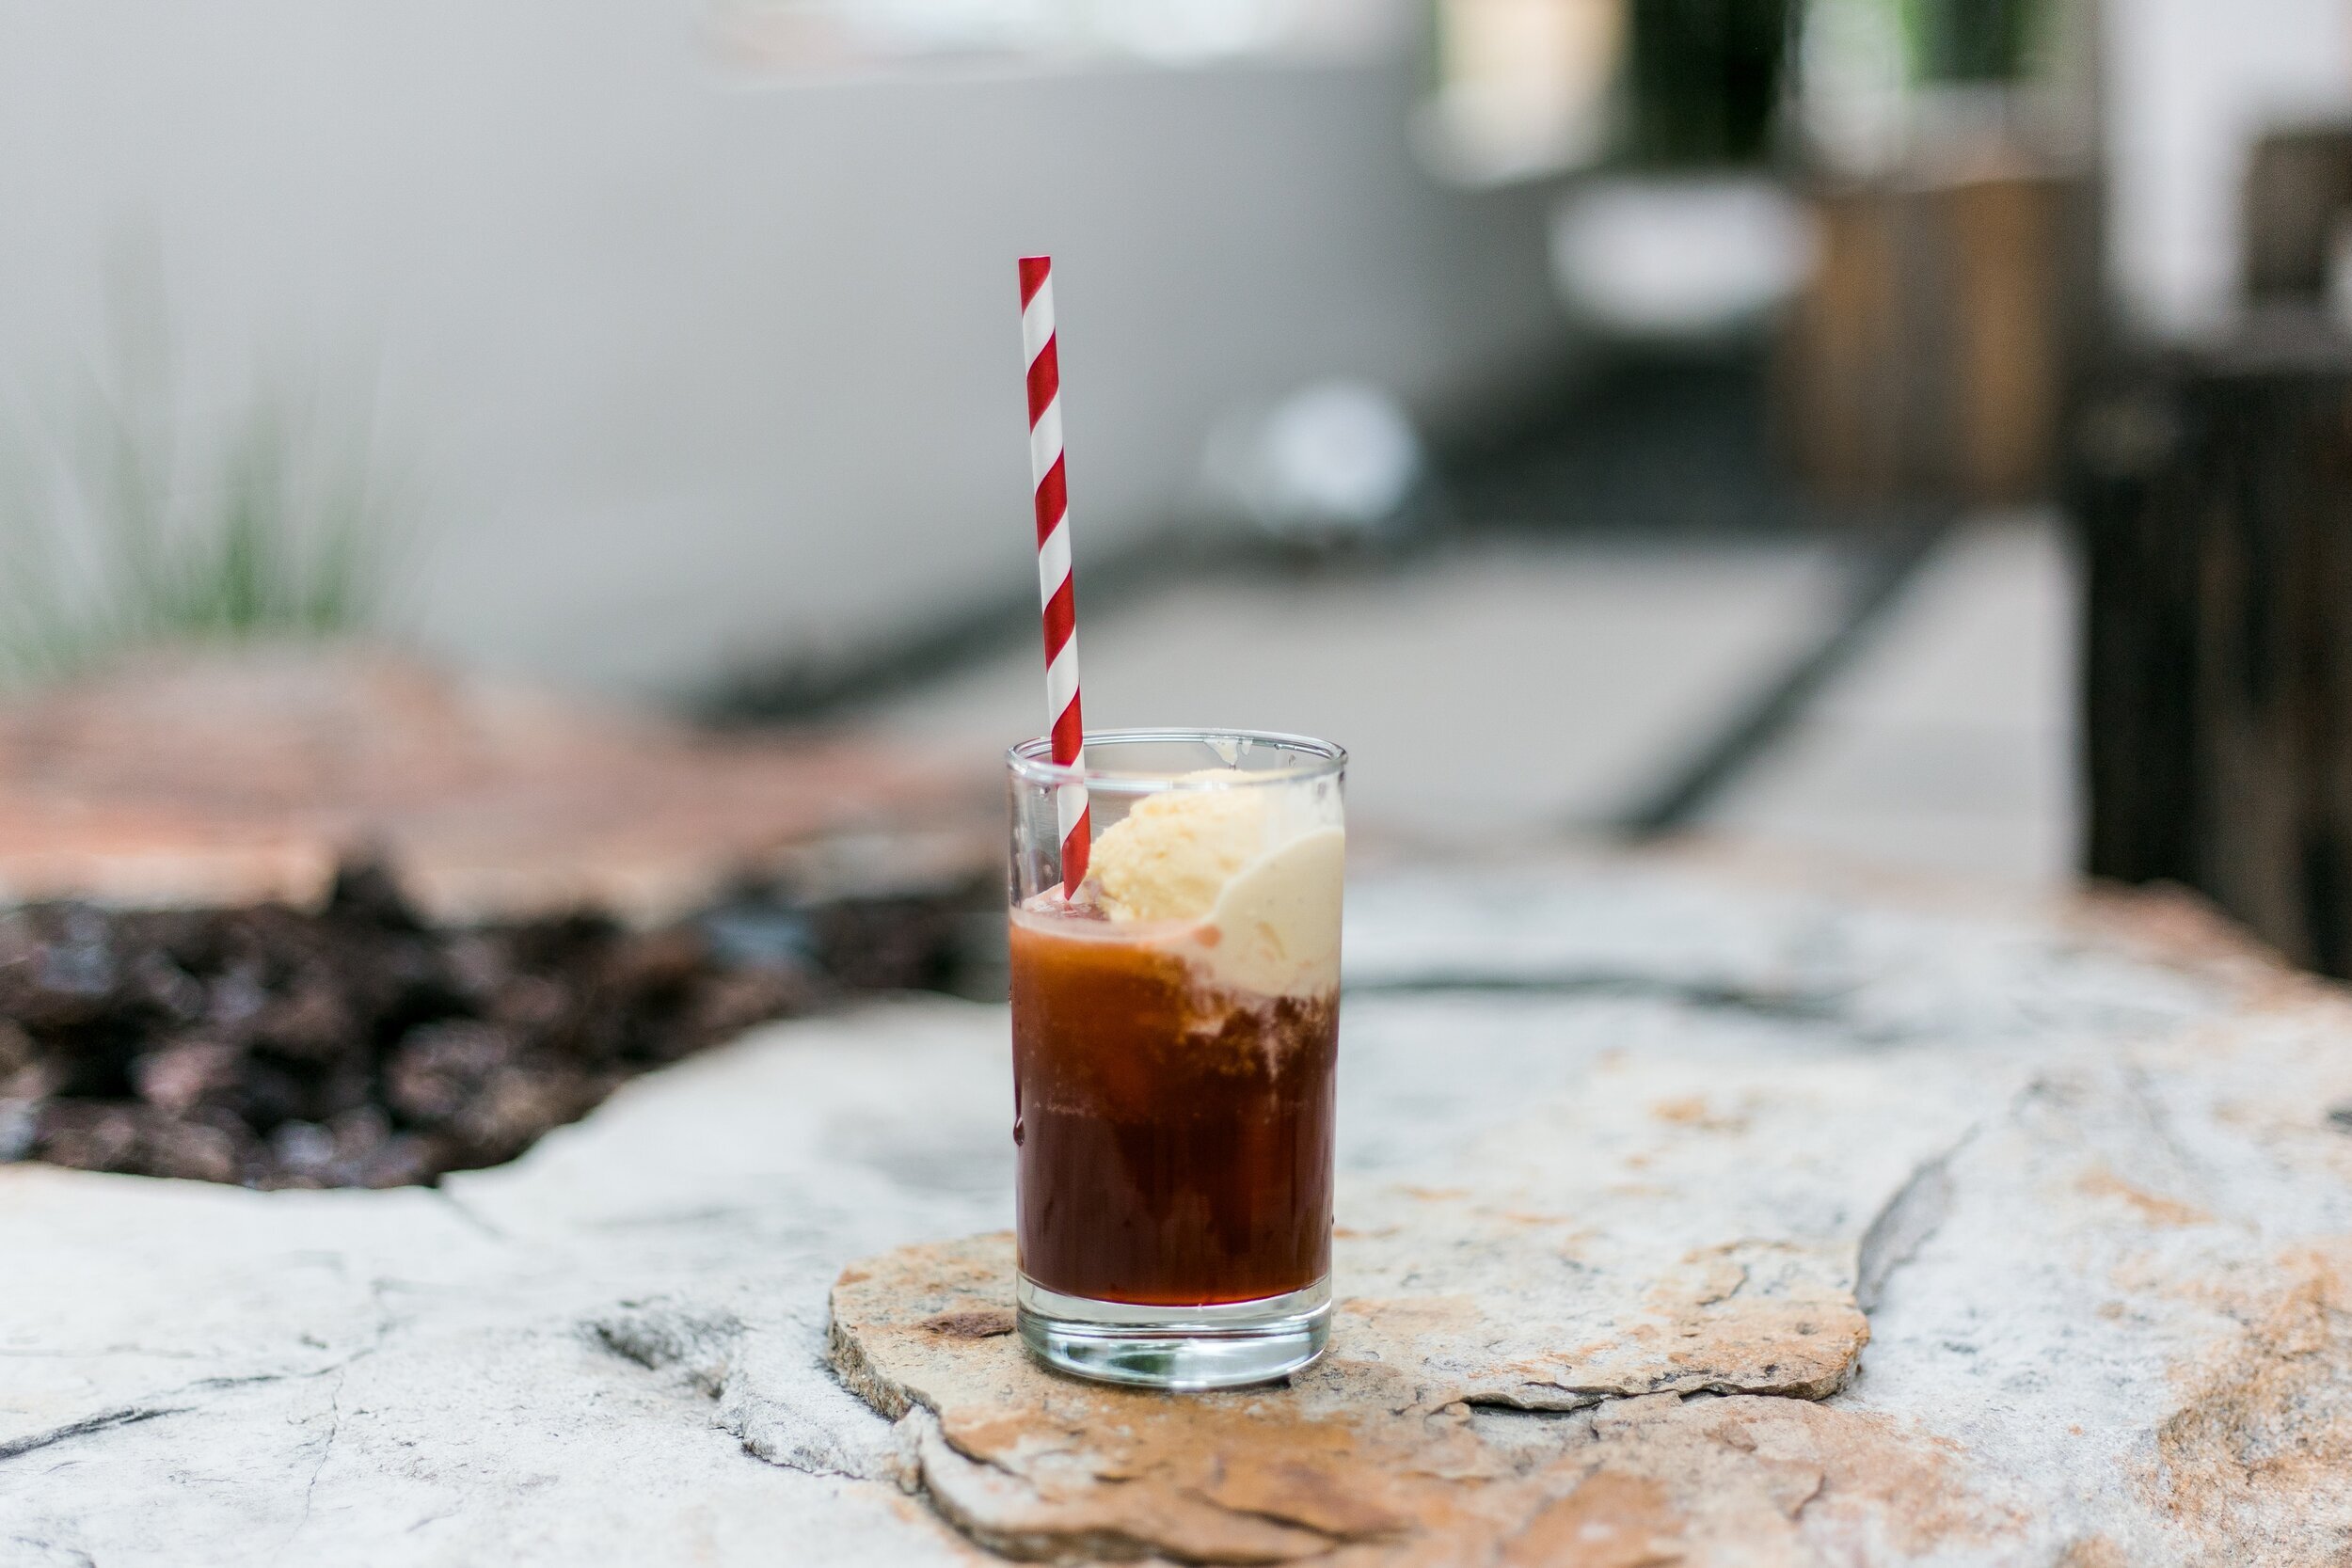 Biodegradable Straws Reportedly Outperform Conventional Plastic Straws